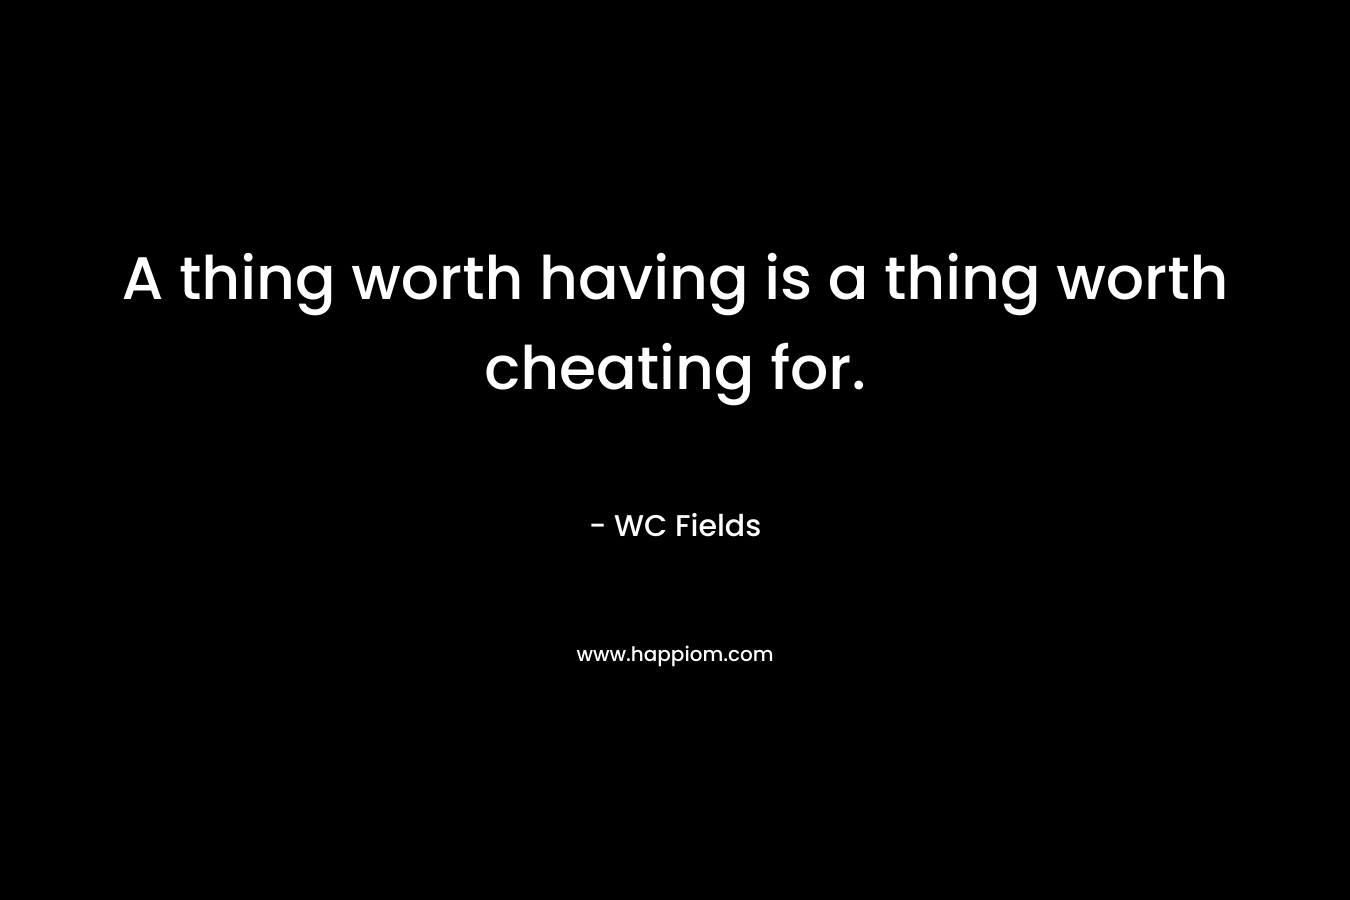 A thing worth having is a thing worth cheating for. – WC Fields